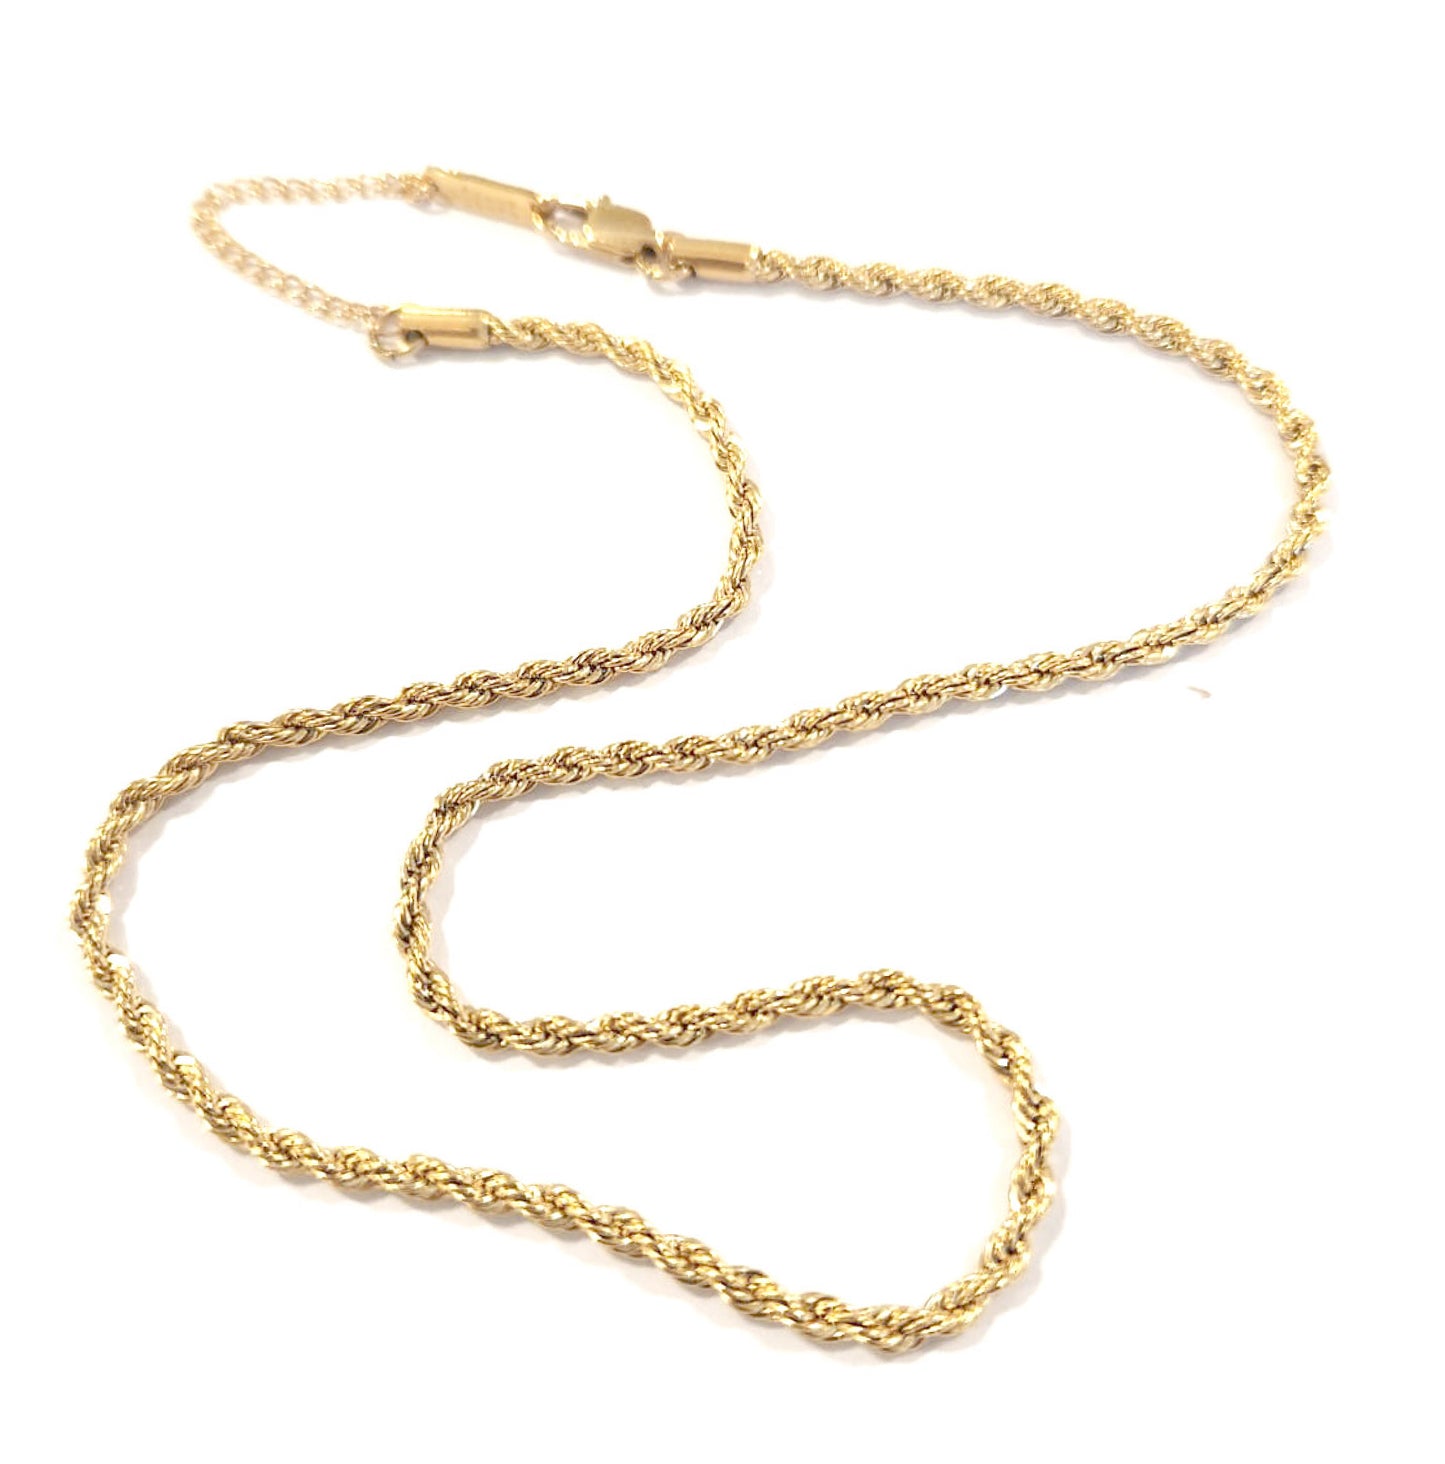 Matter Matters Indivisible Necklace • Gold